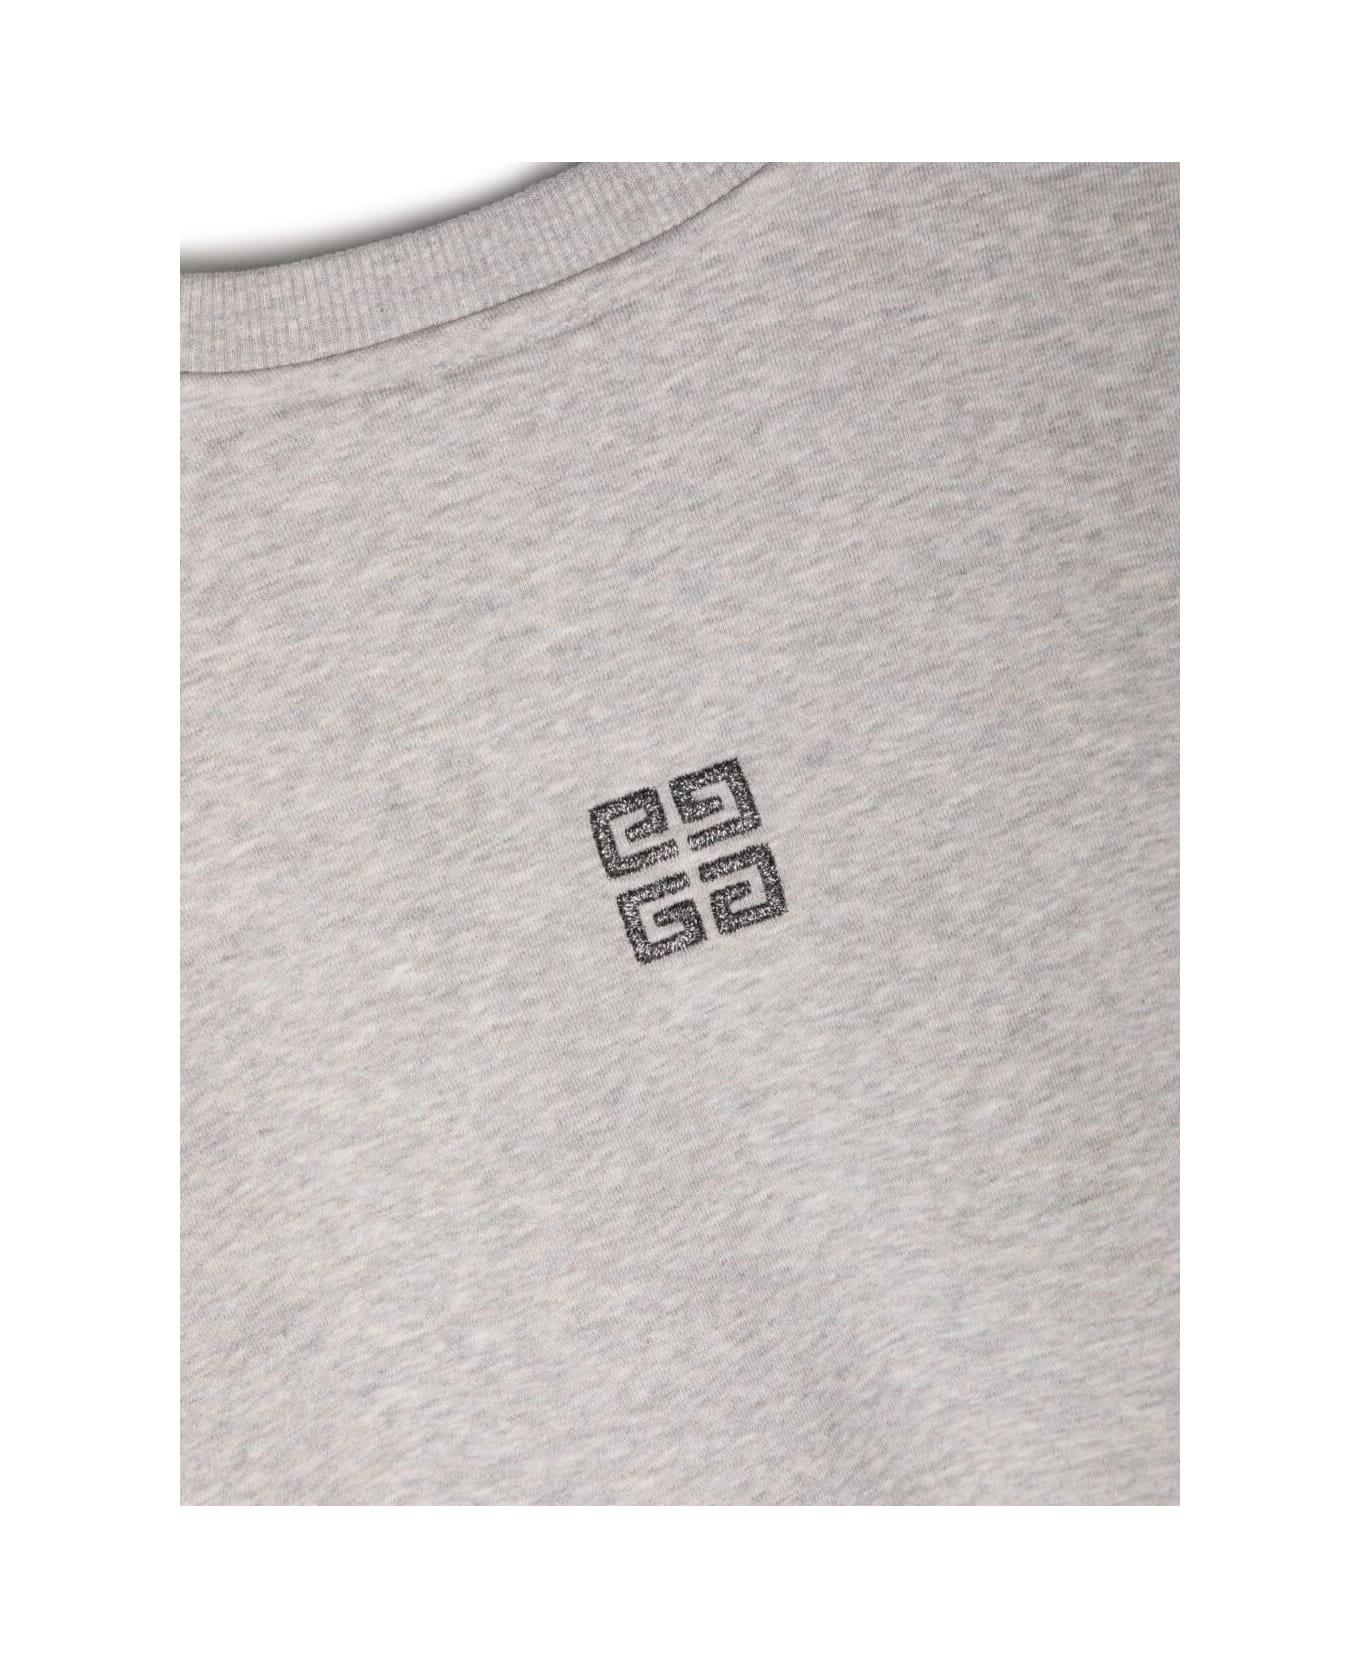 Givenchy Grey Cropped Sweatshirt With Glitter Logo Print And '4g' Motif In Cotton Girl